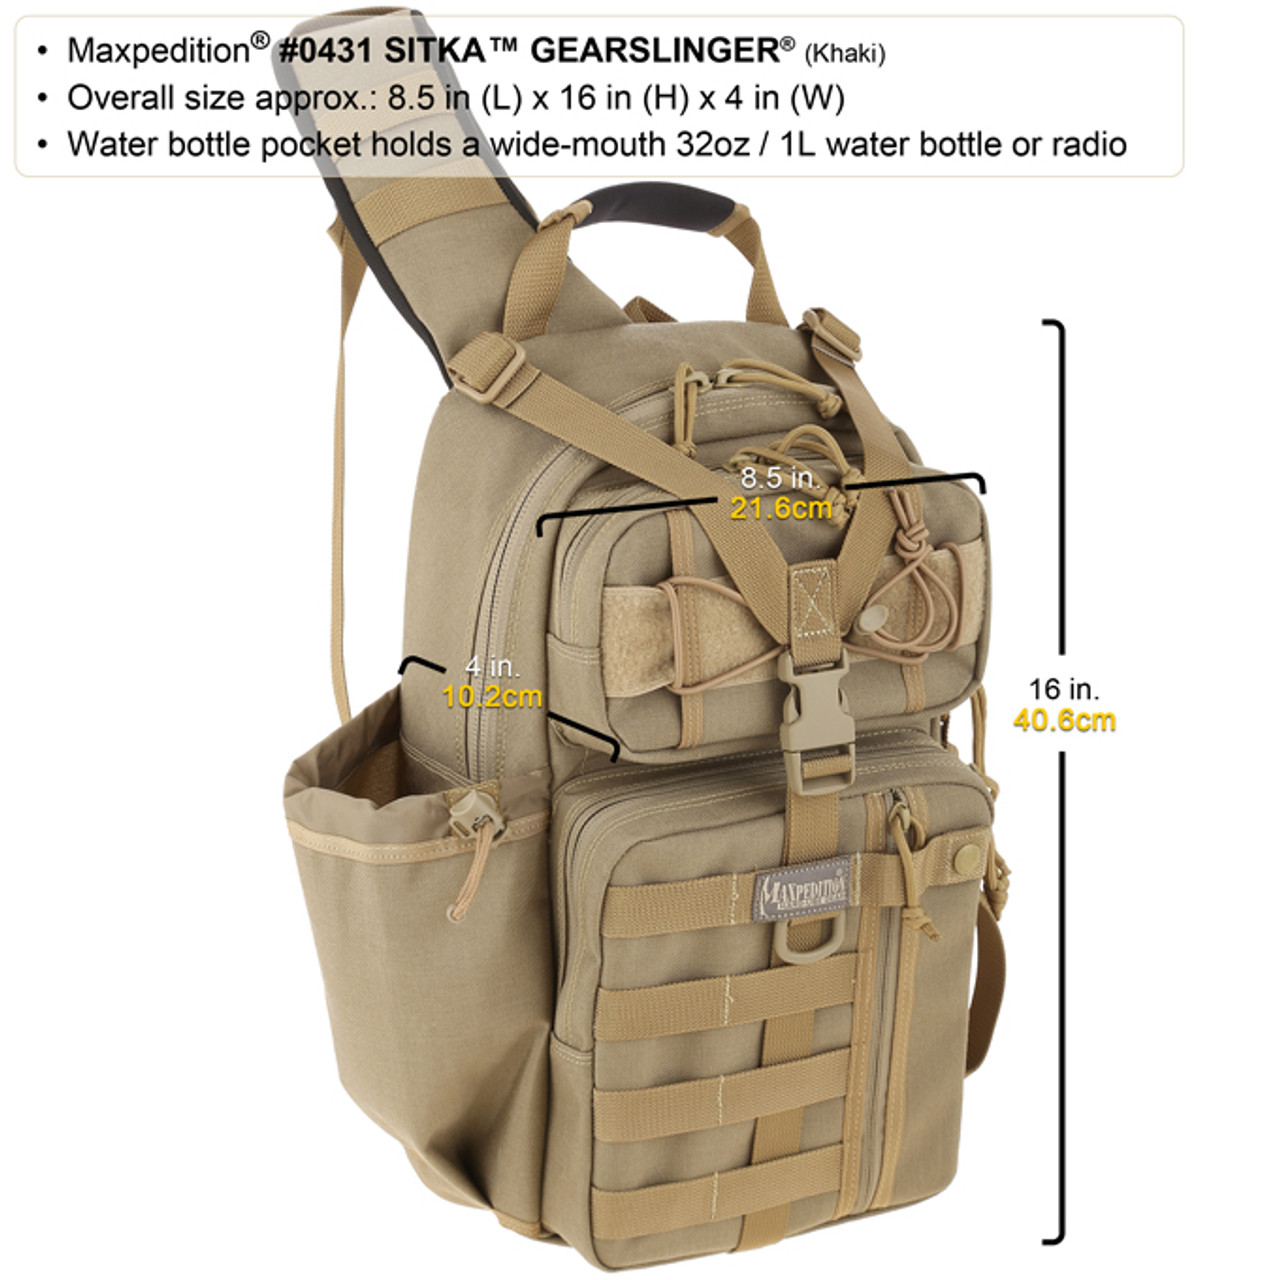 Maxpedition 0431K Sitka Gearslinger Tactical Pack Backpack Khaki